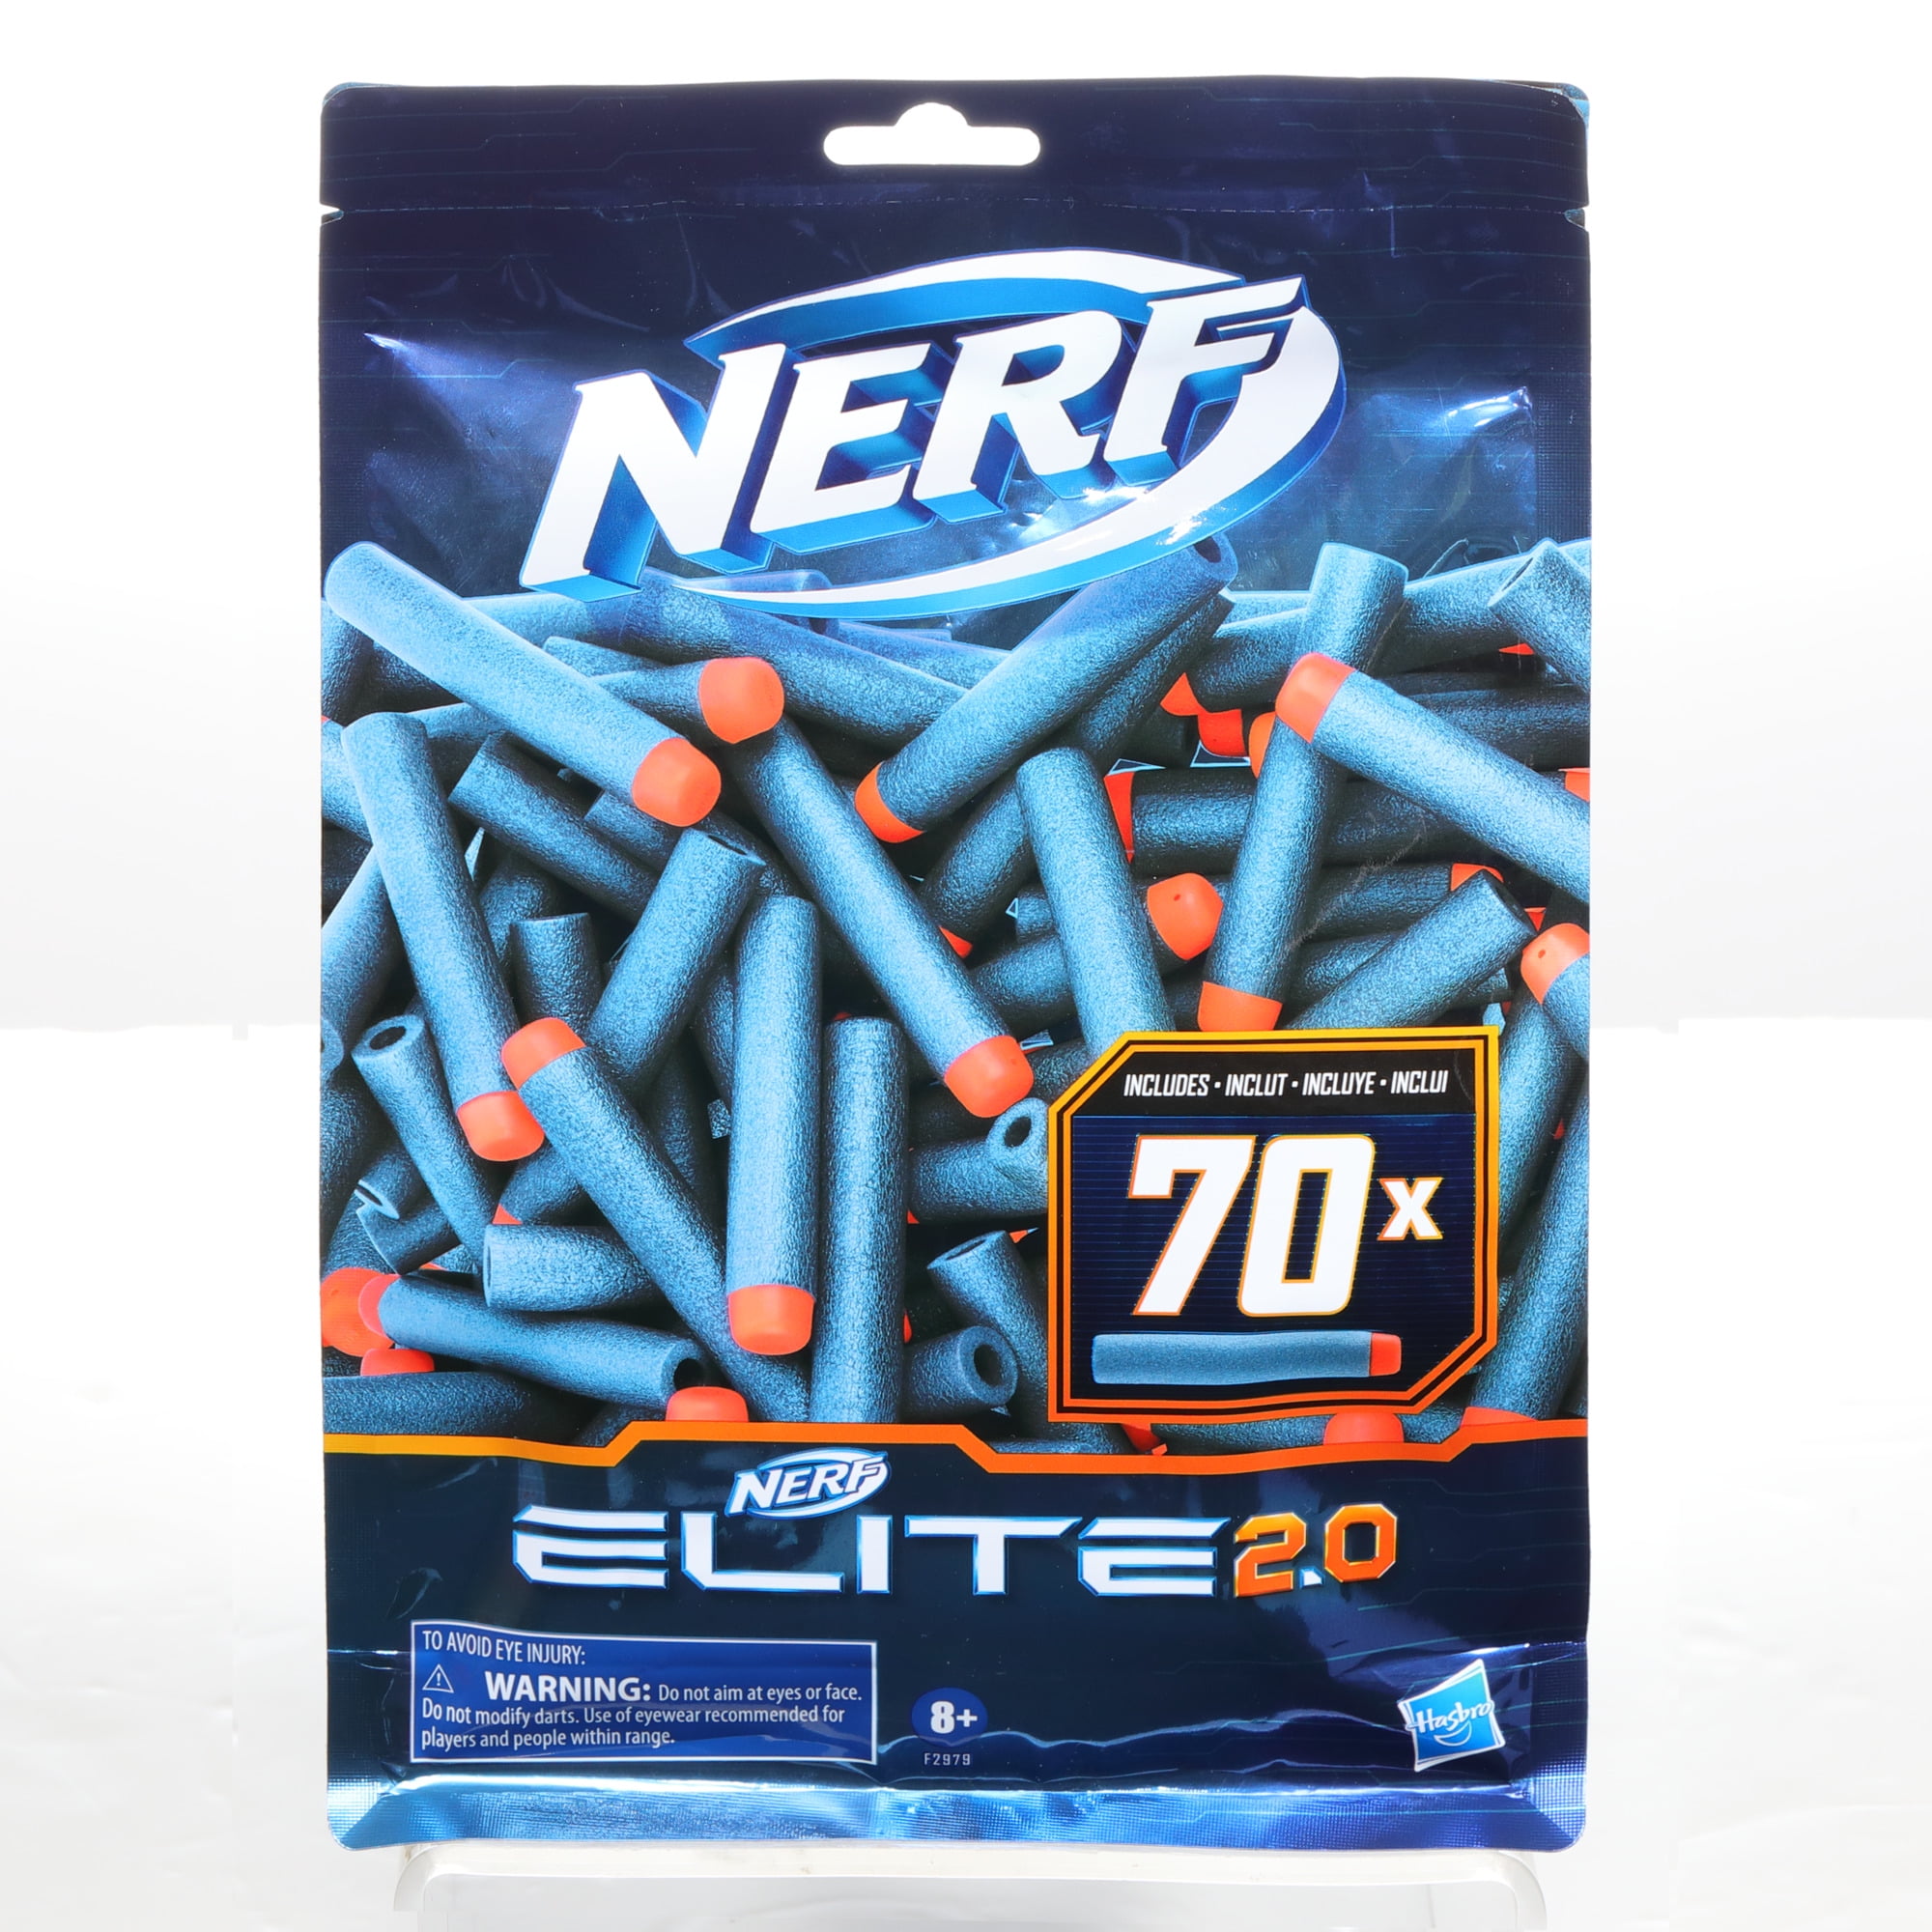 30 Pcs Dart Refill darts Nerf gun Compatible With All Major Brands Teal Colors 